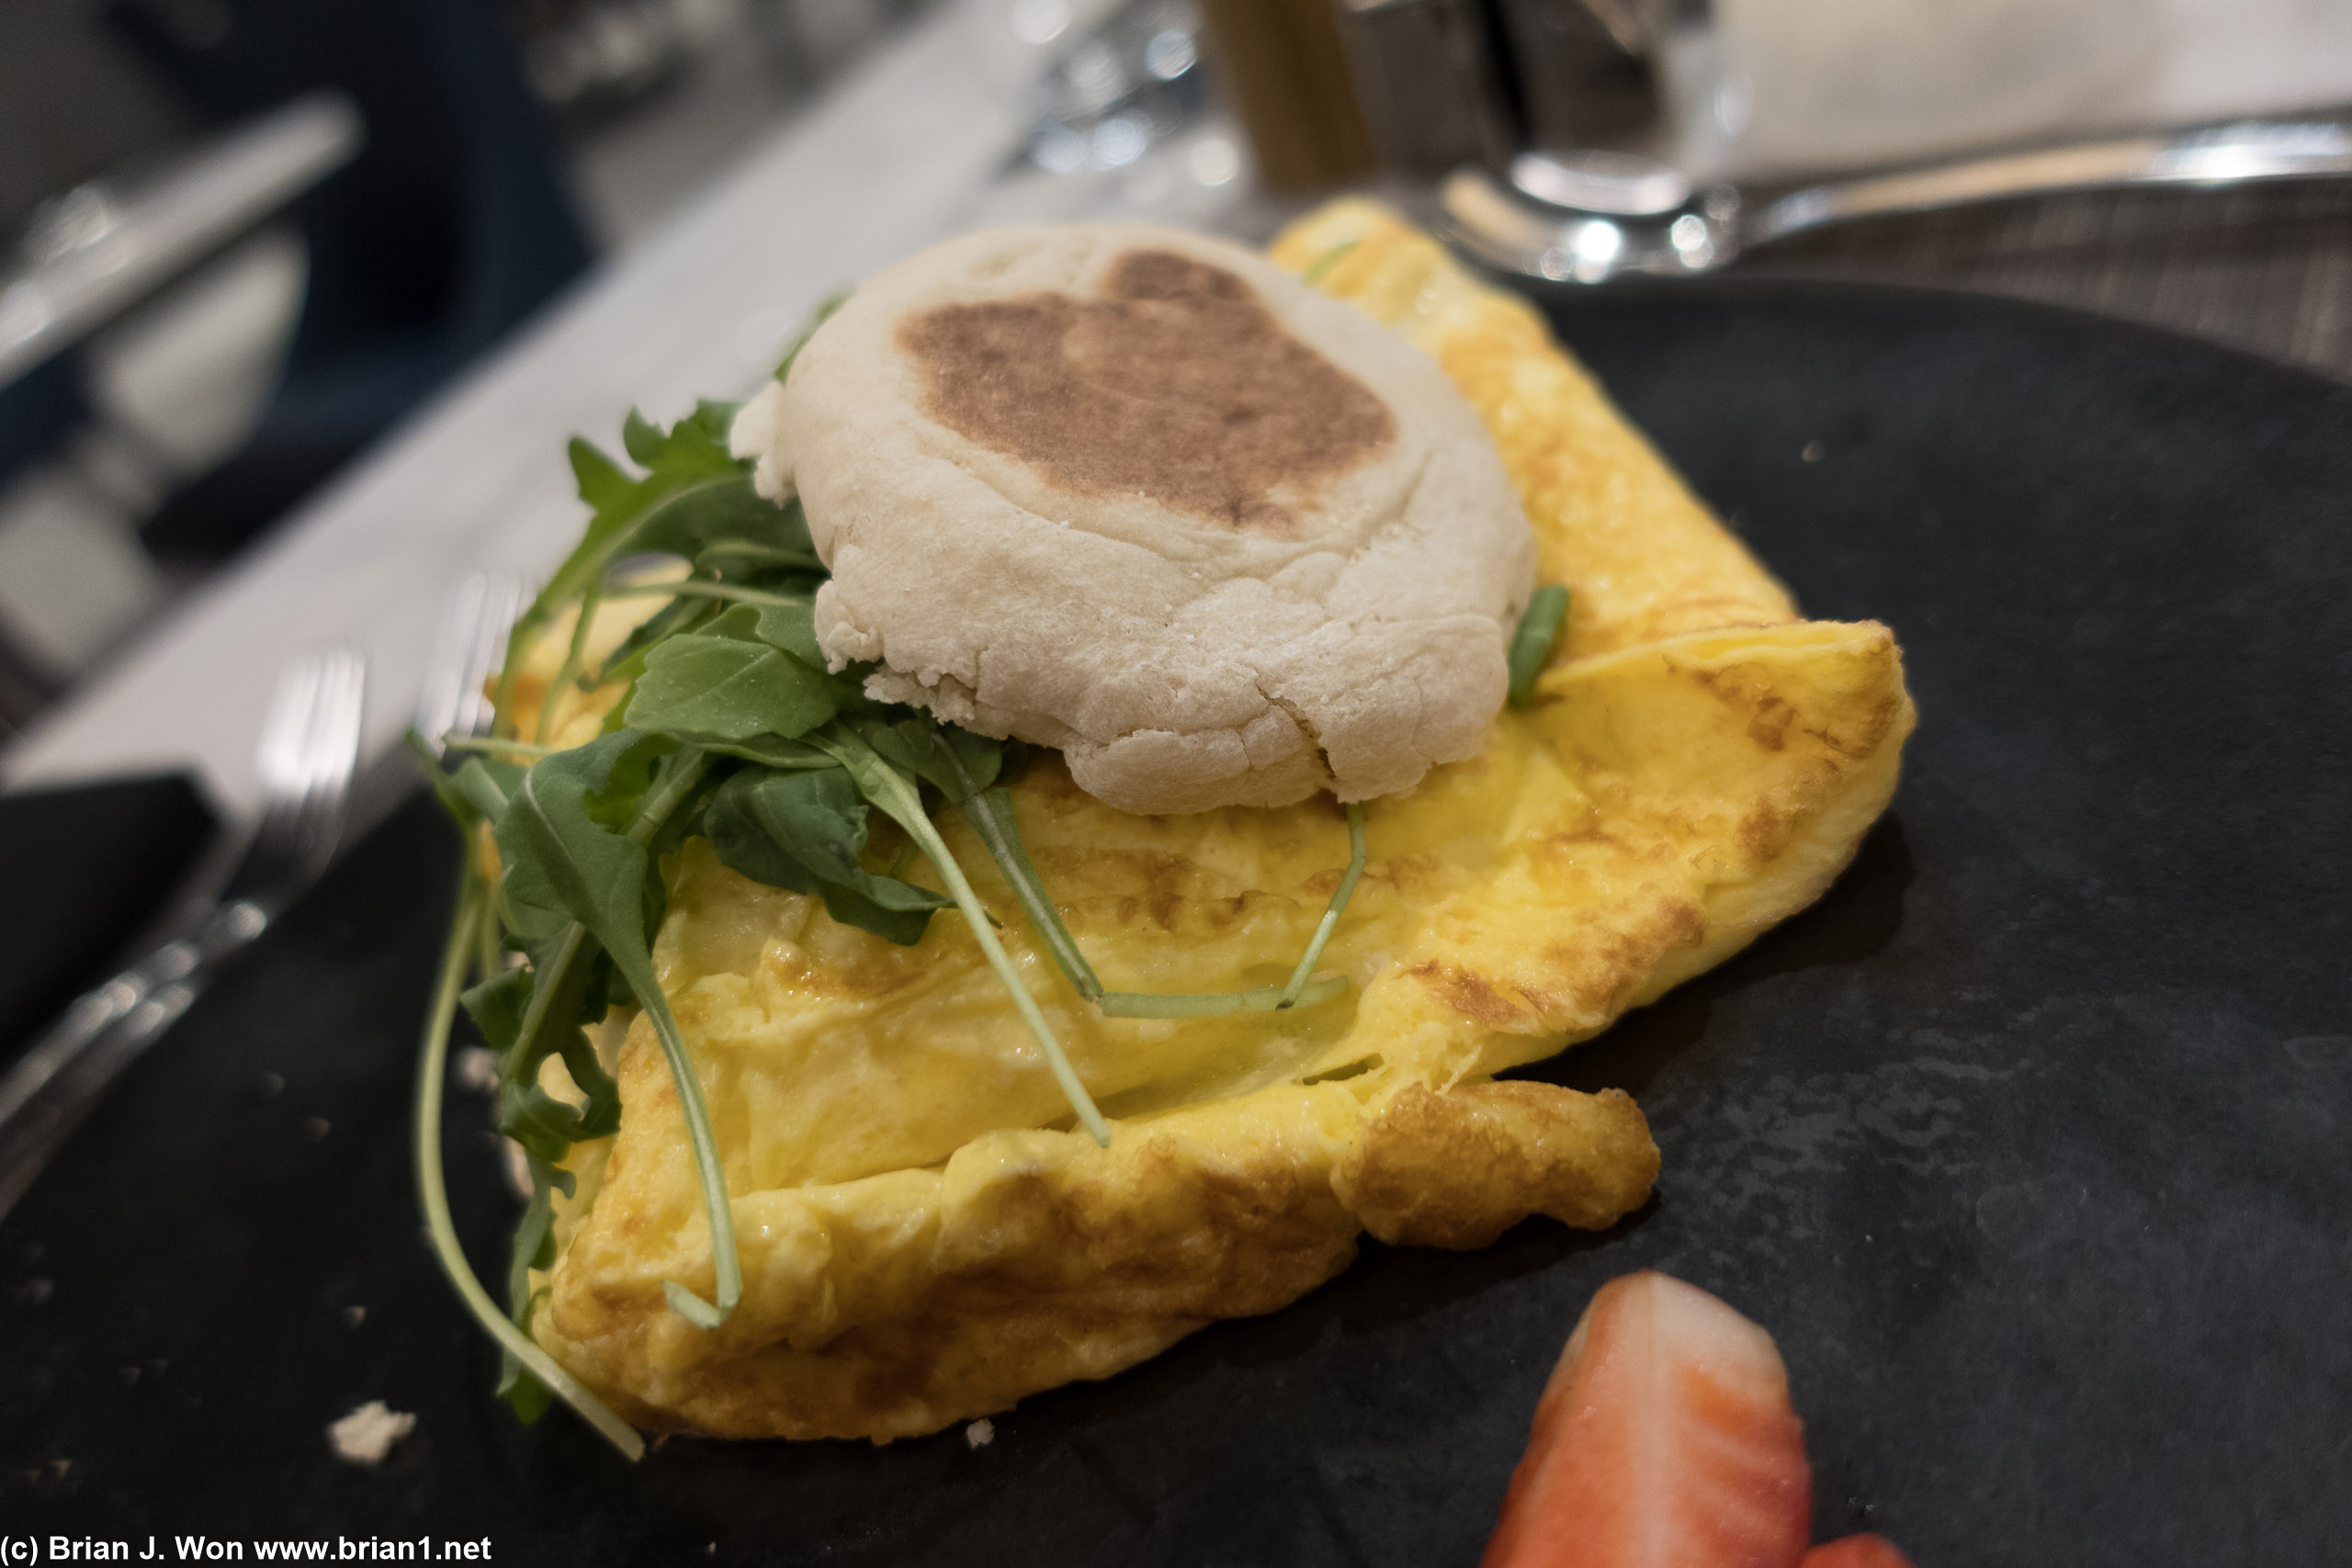 The IAD Breakfast Sandwich is apparently an entire crab omelet in an english muffin.